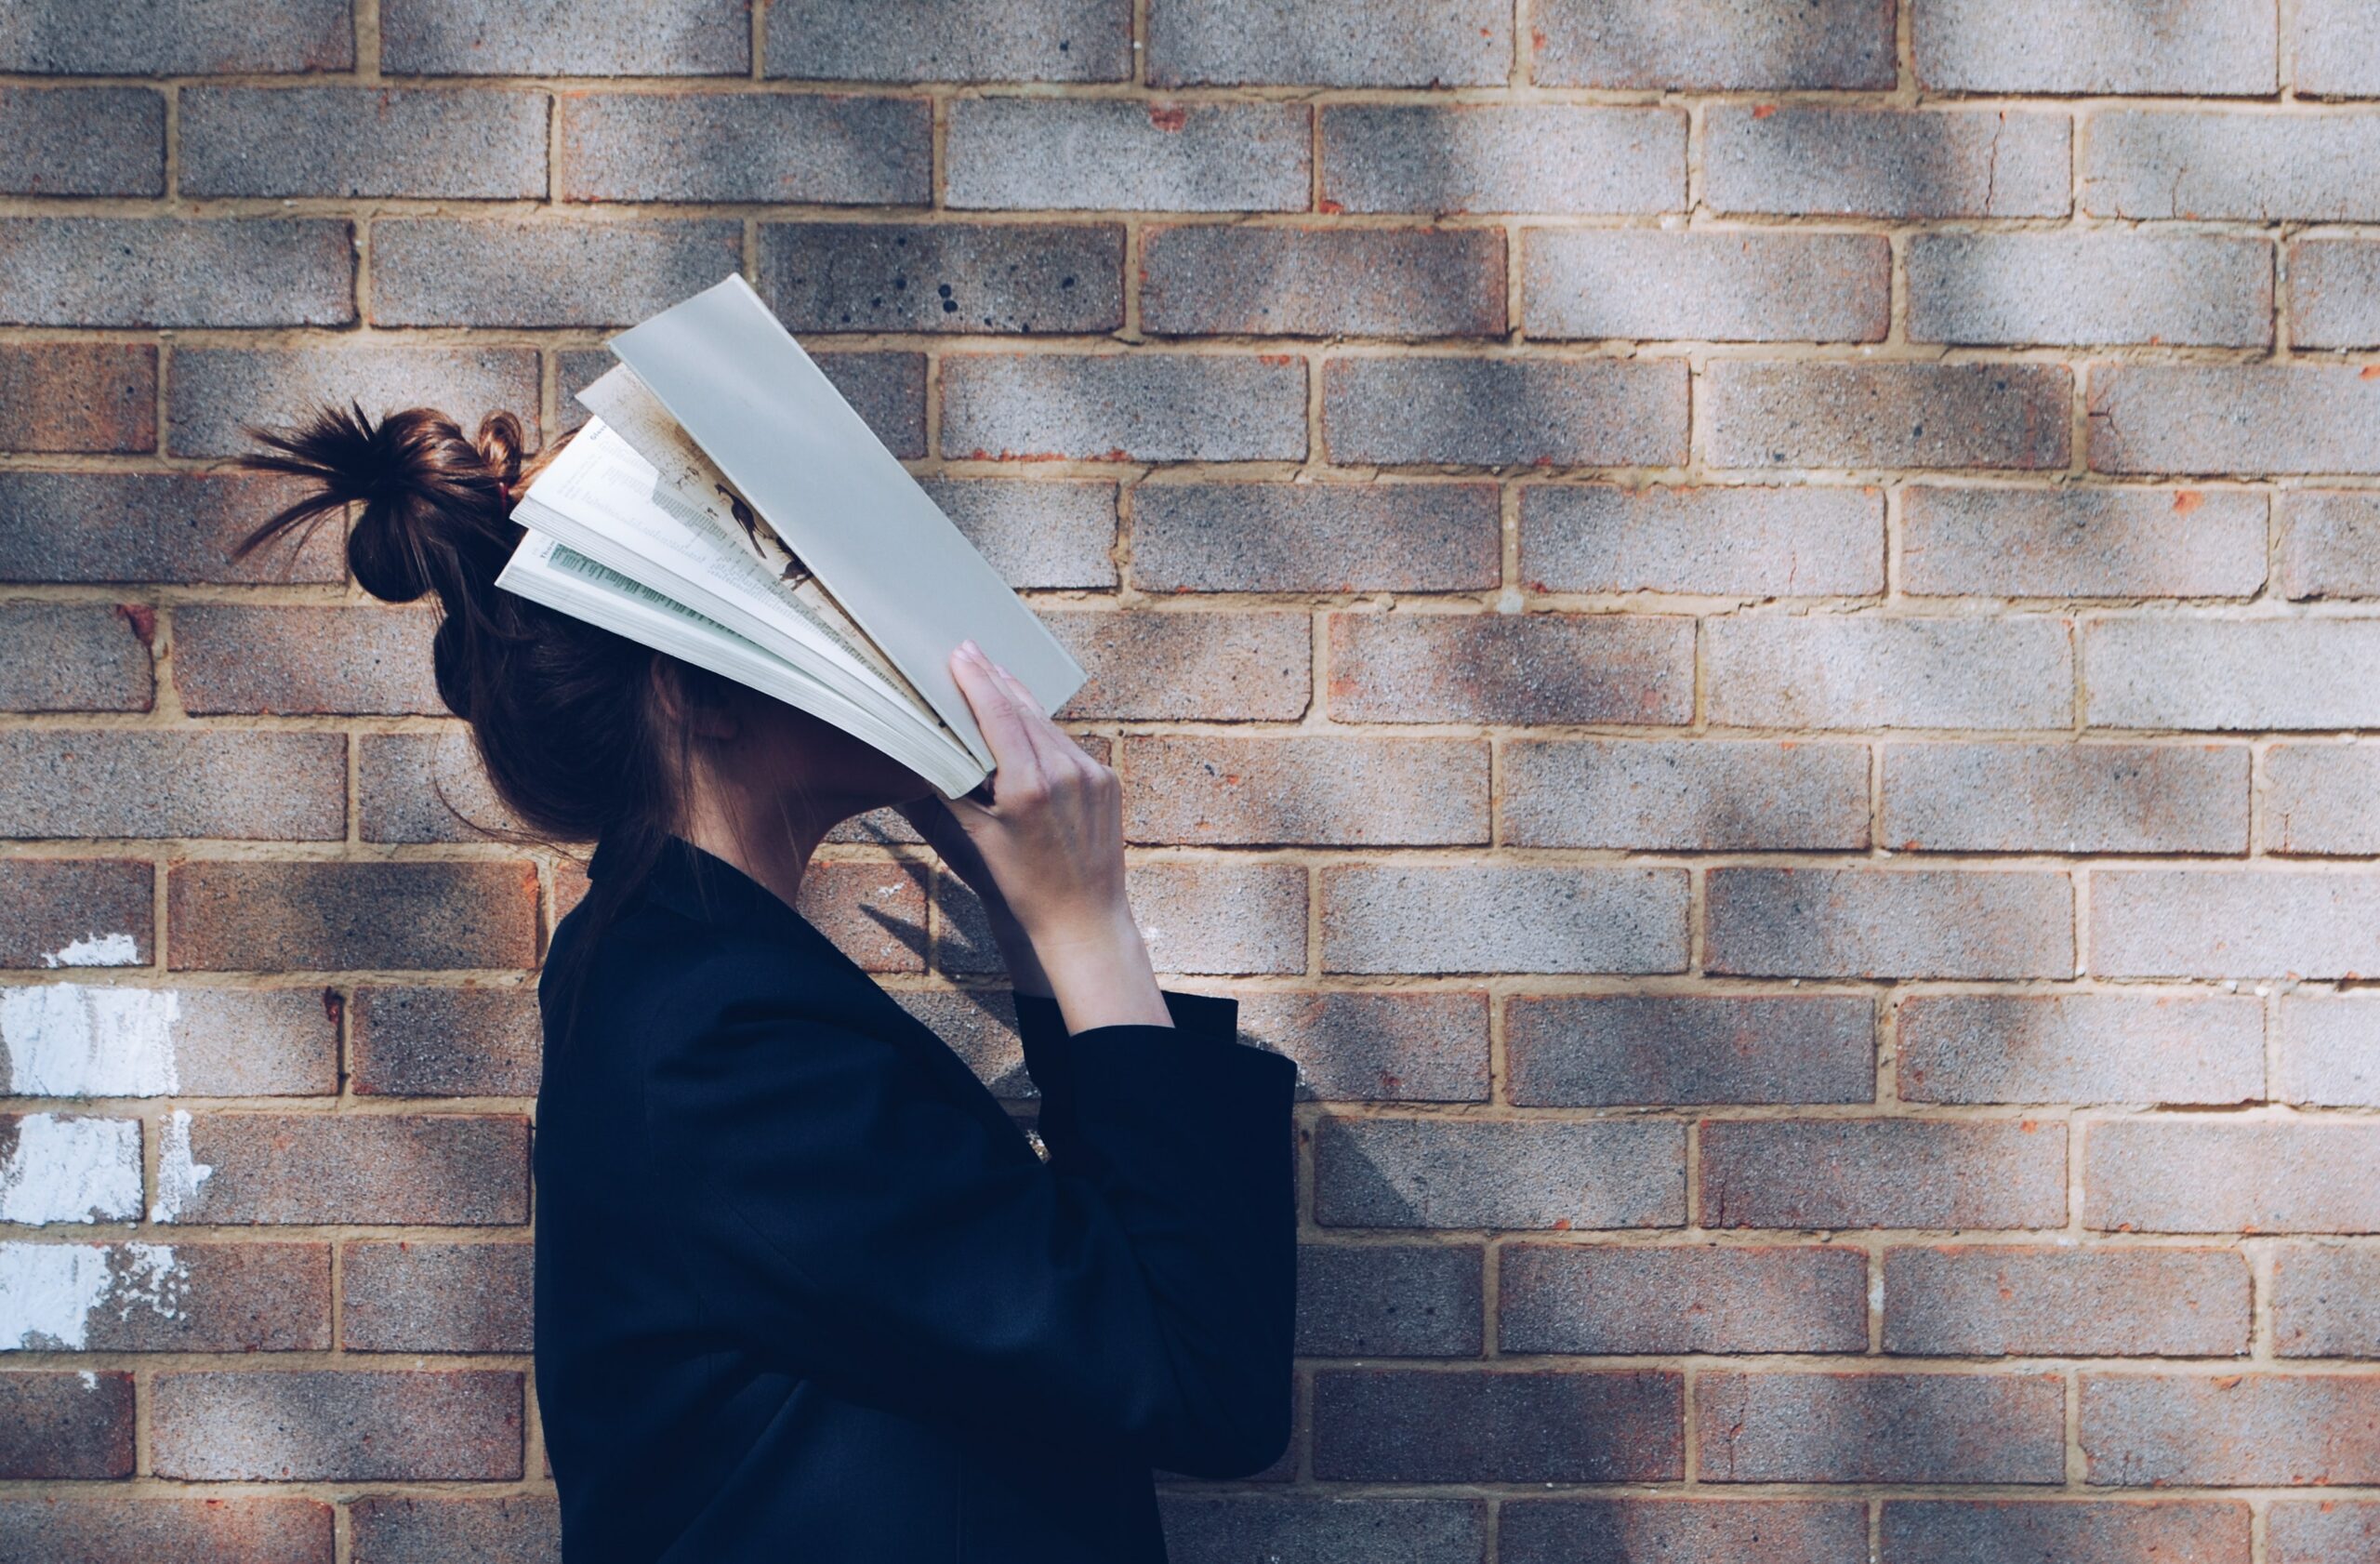 A photo of a woman standing side-on in front of a brick wall. She is wearing a black top, and holding a book right up close to her face, so her face is covered by the book.